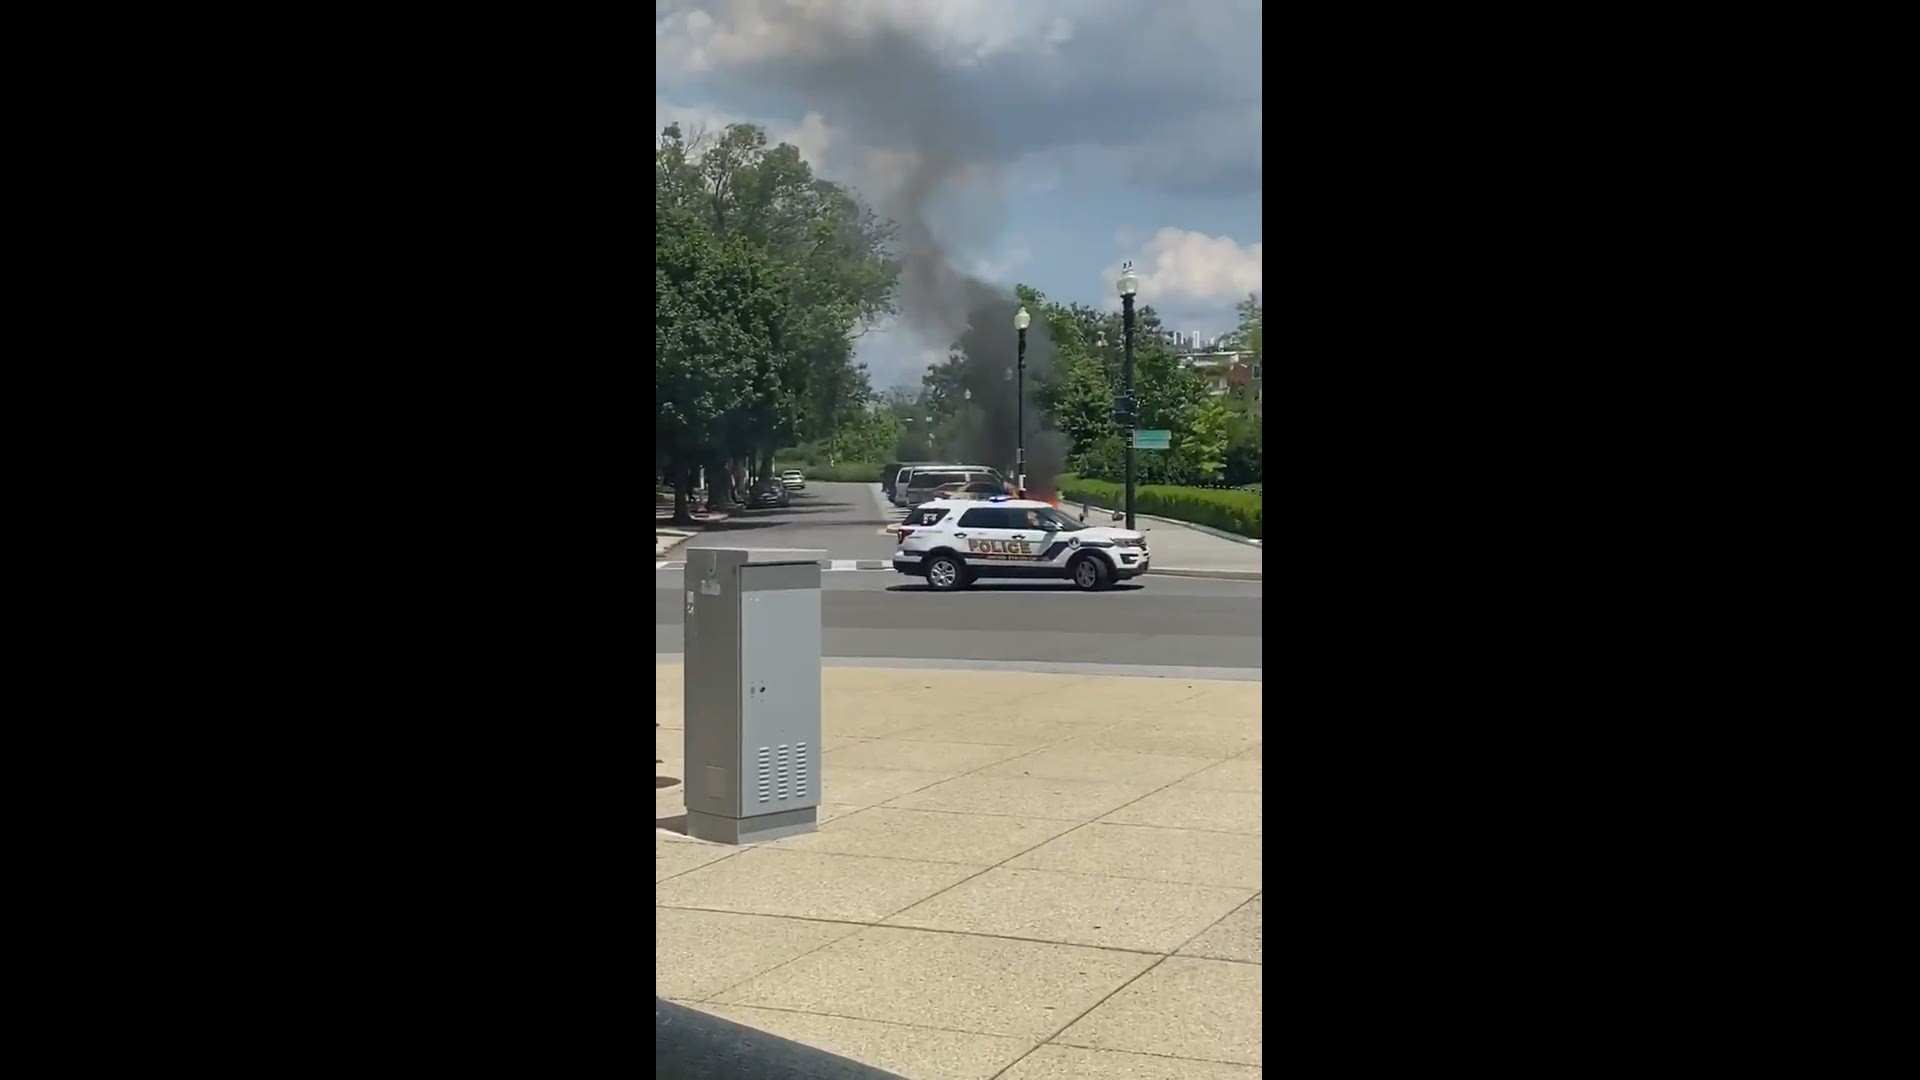 The vehicle on fire was located in the 100 block of Maryland Avenue, Northeast, adjacent to the Supreme Court.